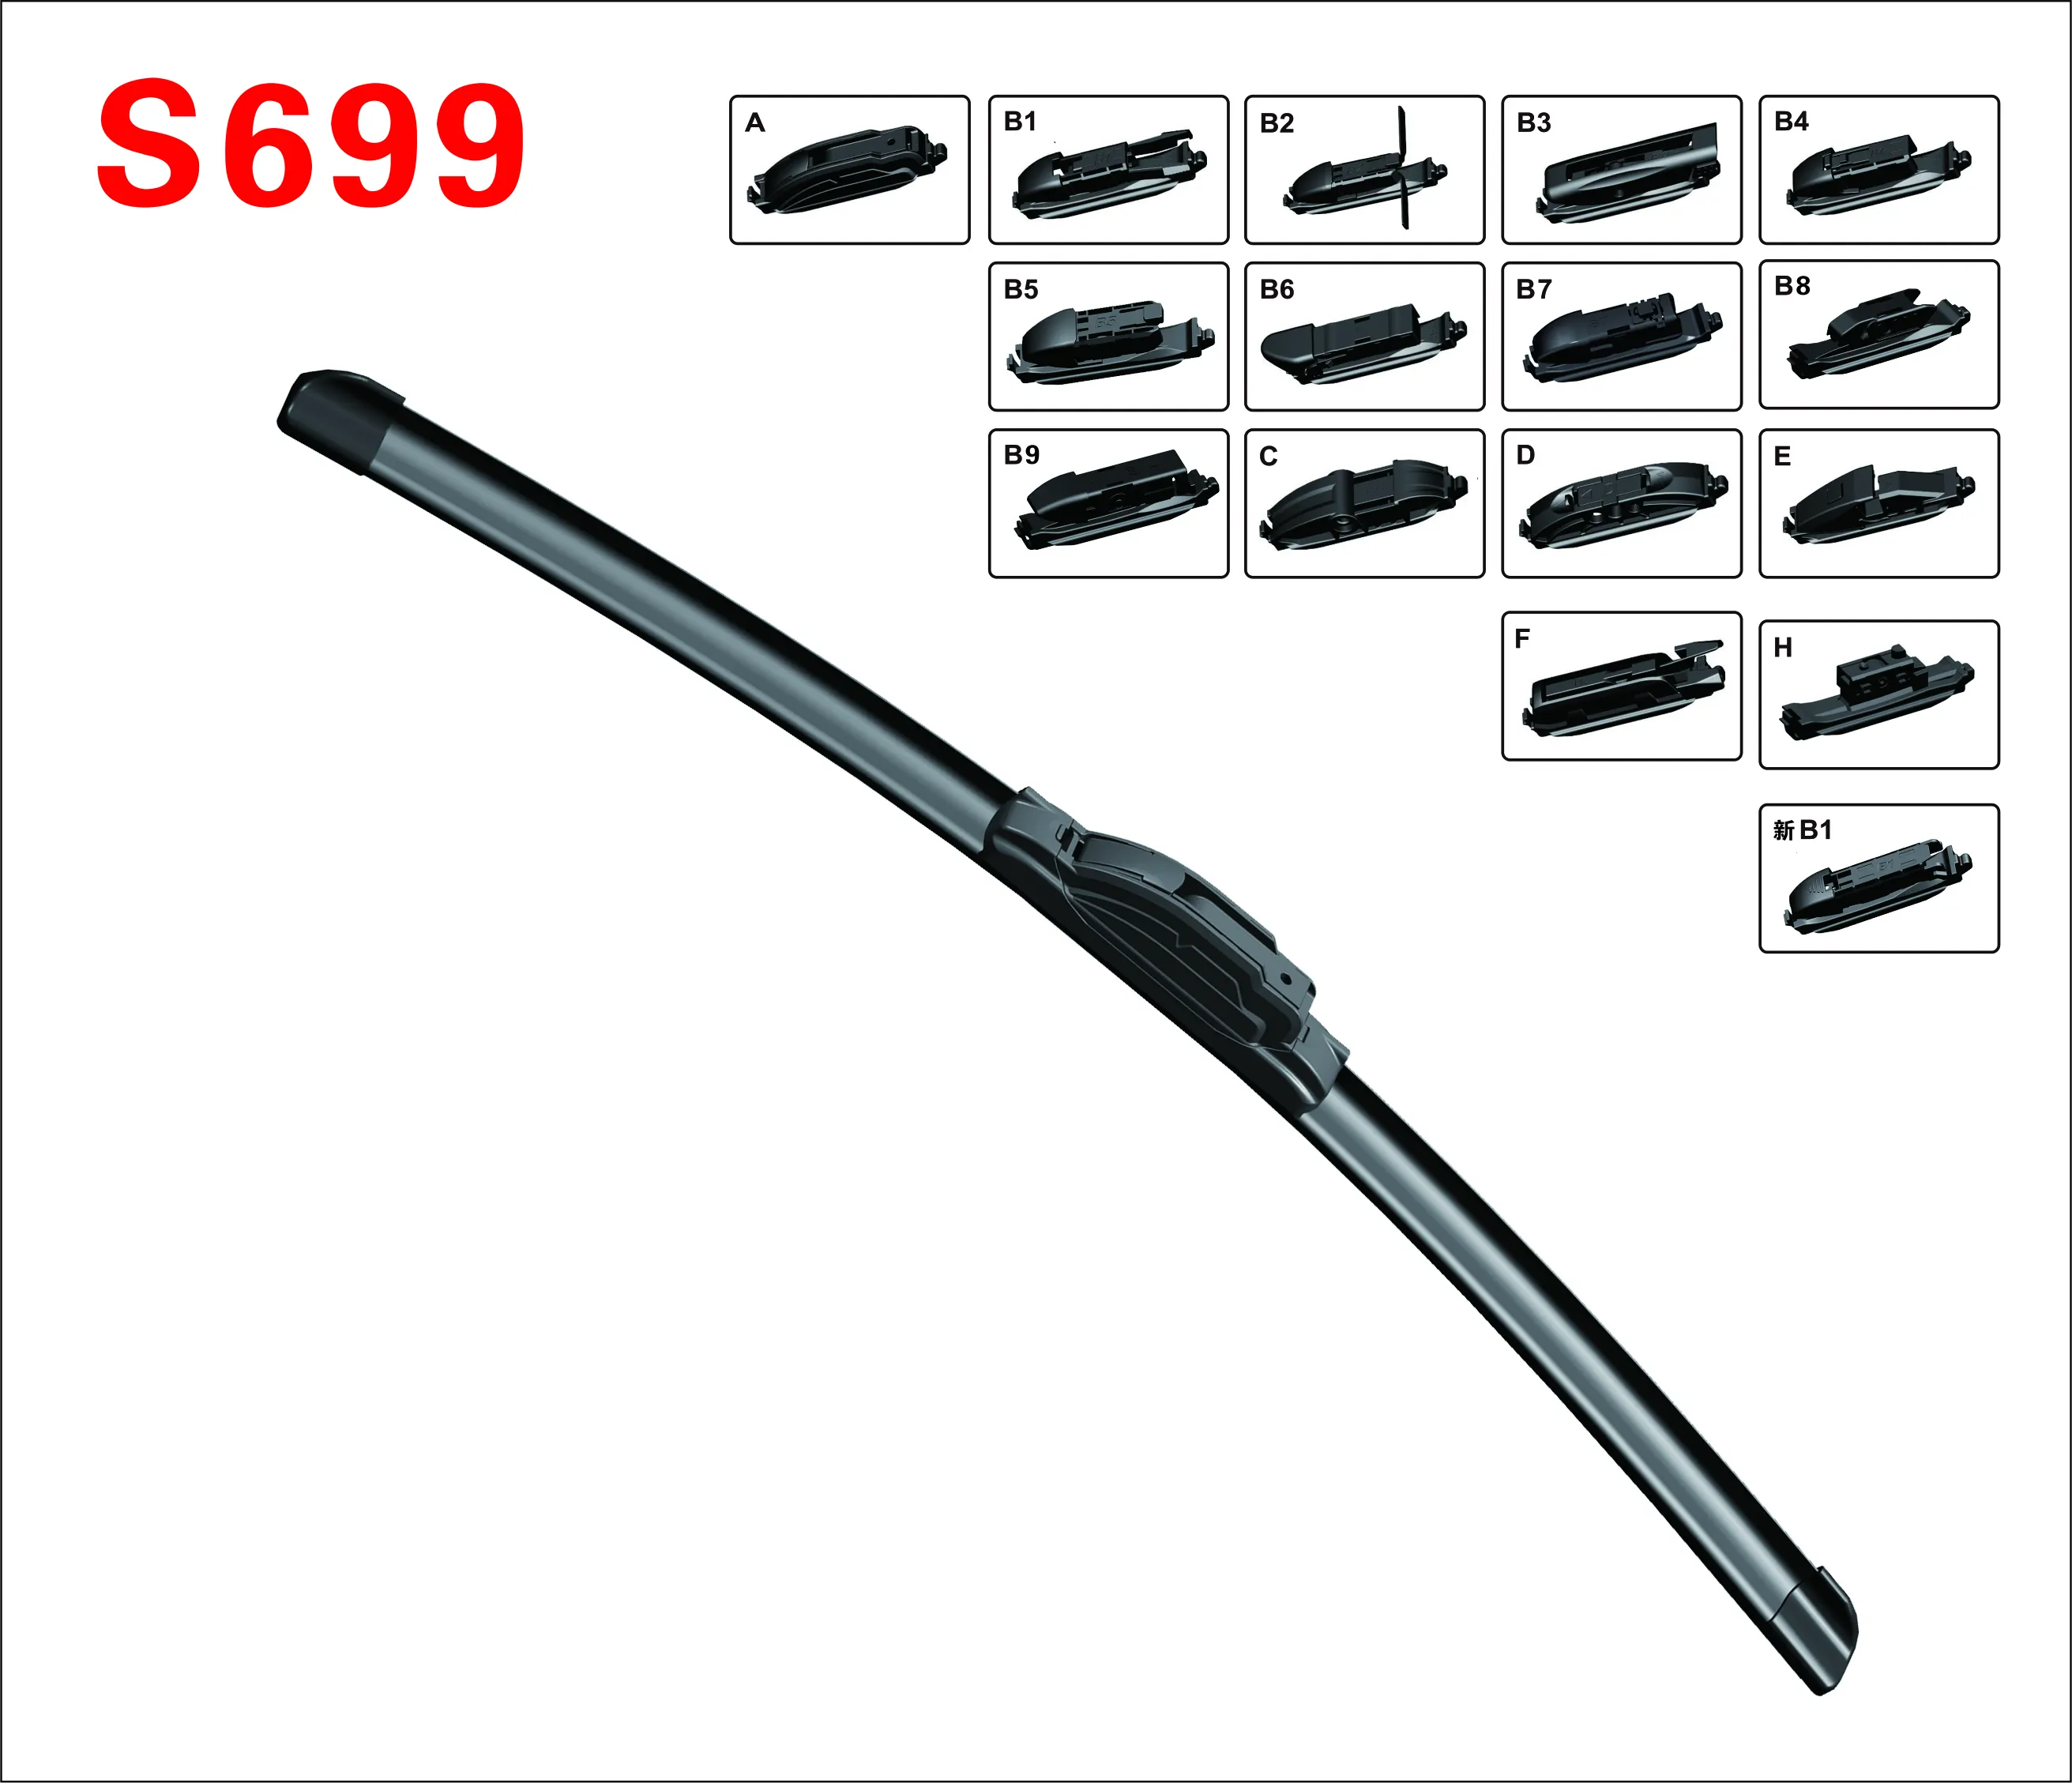 Frameless Soft Wiper Blade Window Cleaning Washer Wipers Wholesale Windshield and Glass Universal 14-28 Inches Black Carton